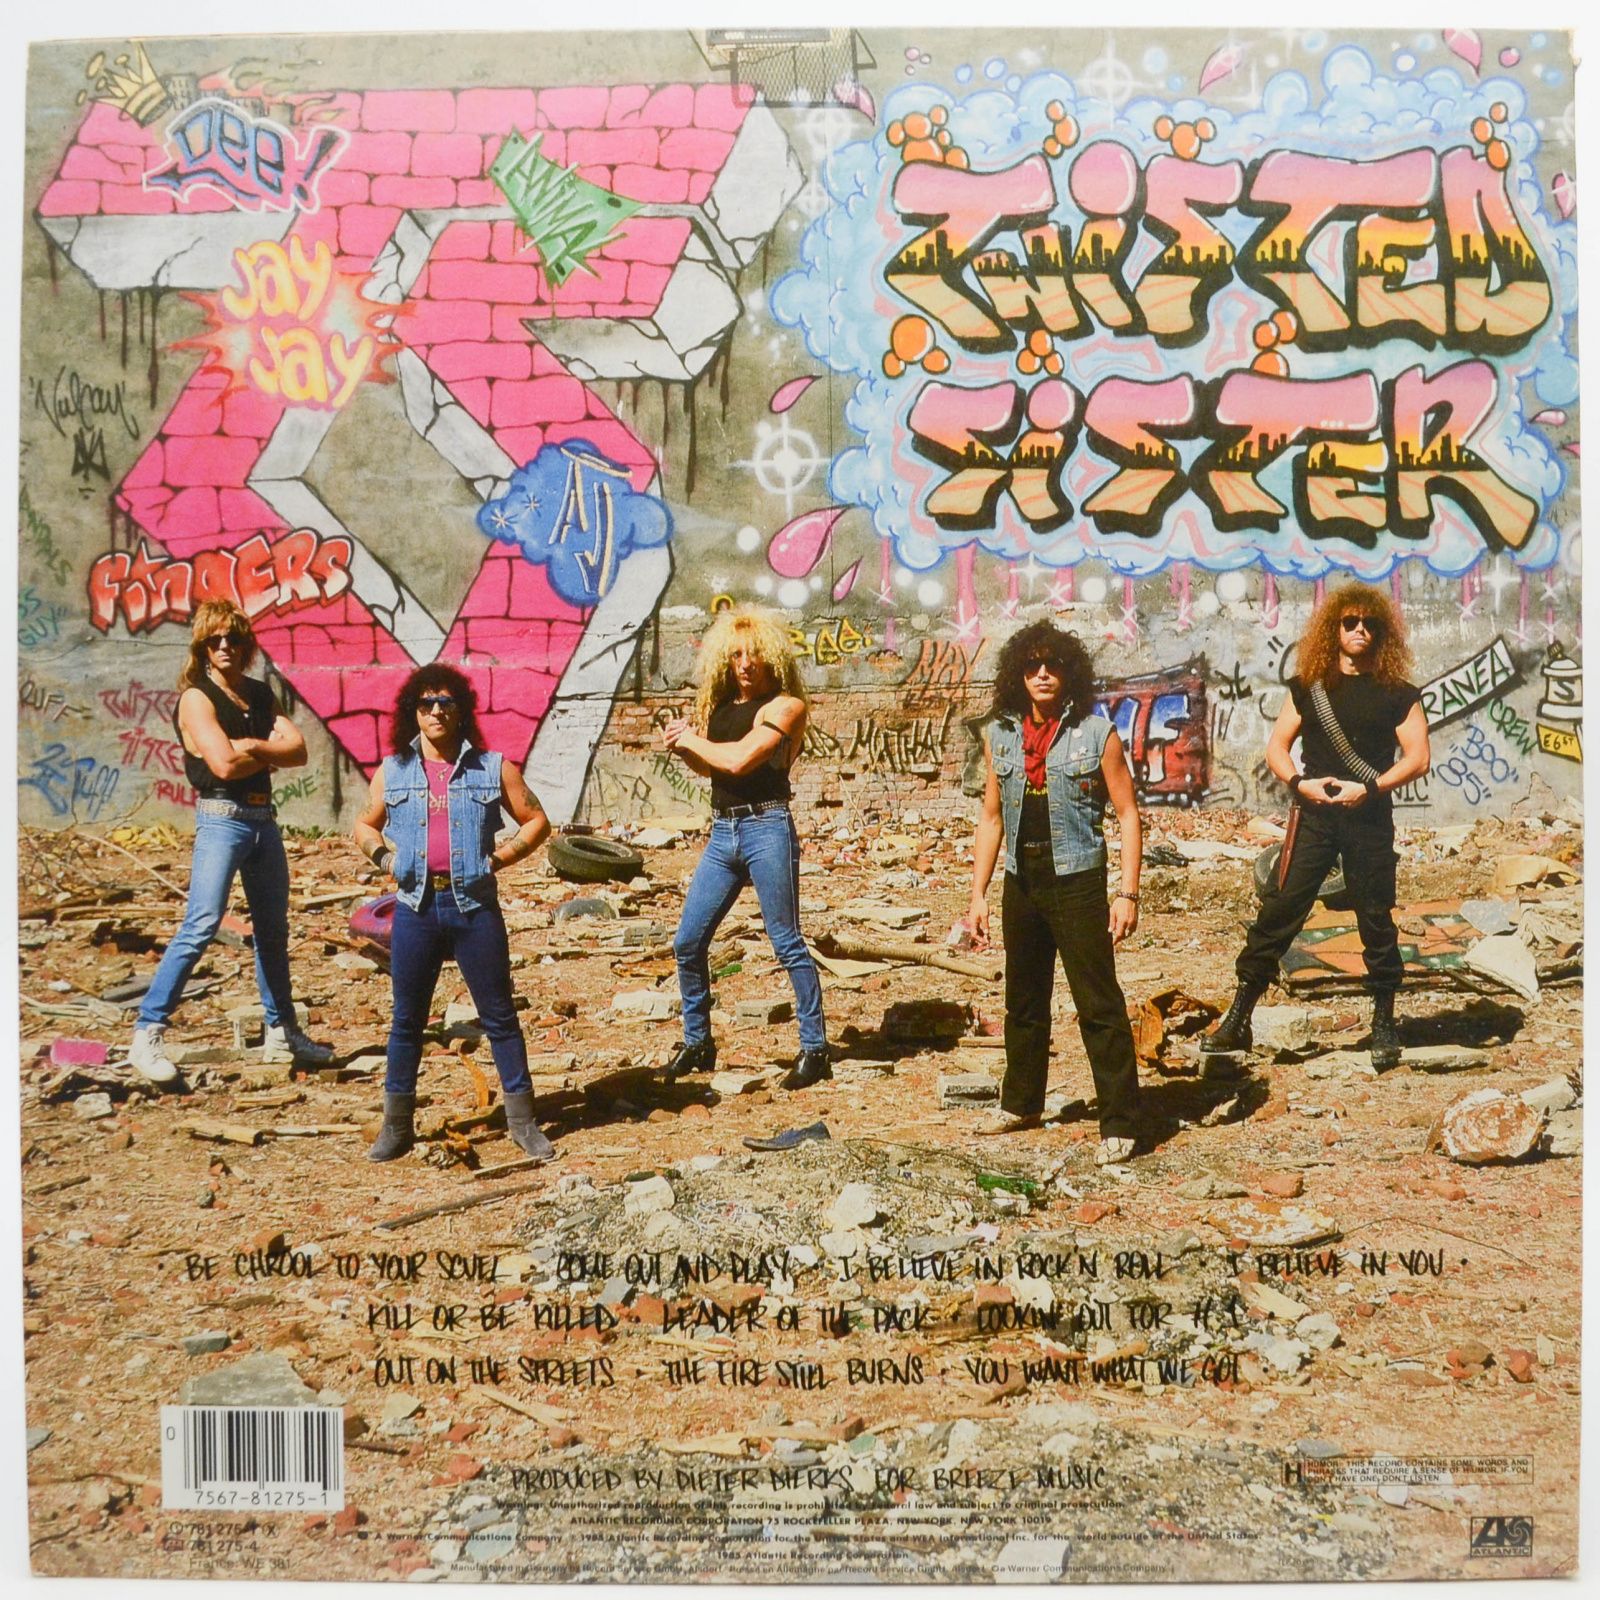 Twisted Sister — Come Out And Play, 1985